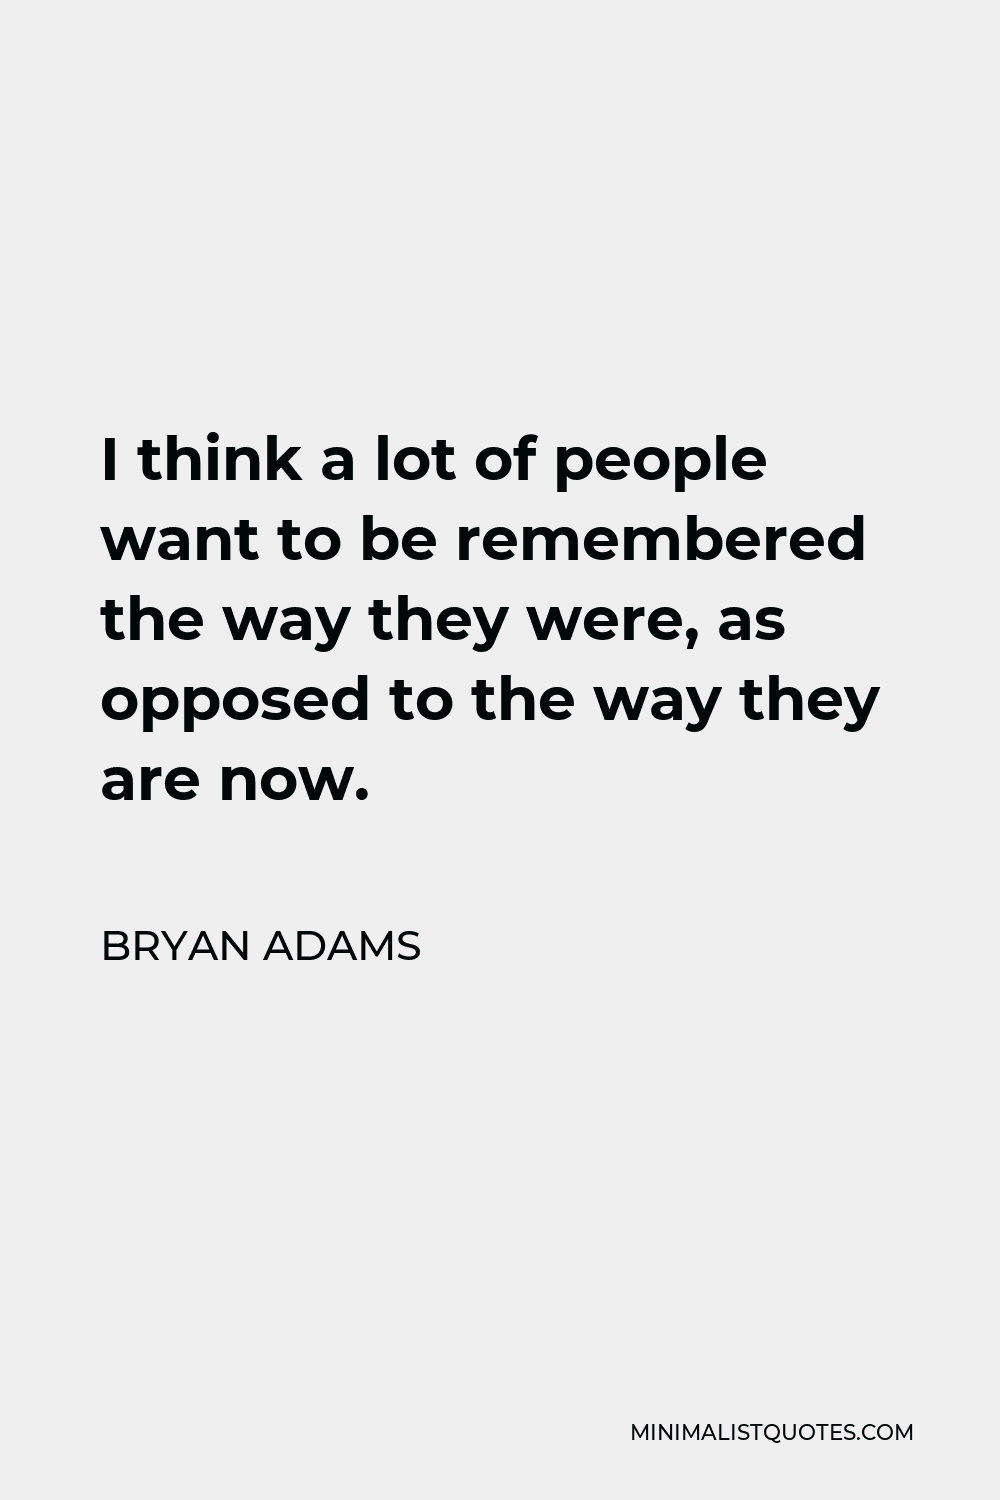 Bryan Adams Quote - I think a lot of people want to be remembered the way they were, as opposed to the way they are now.